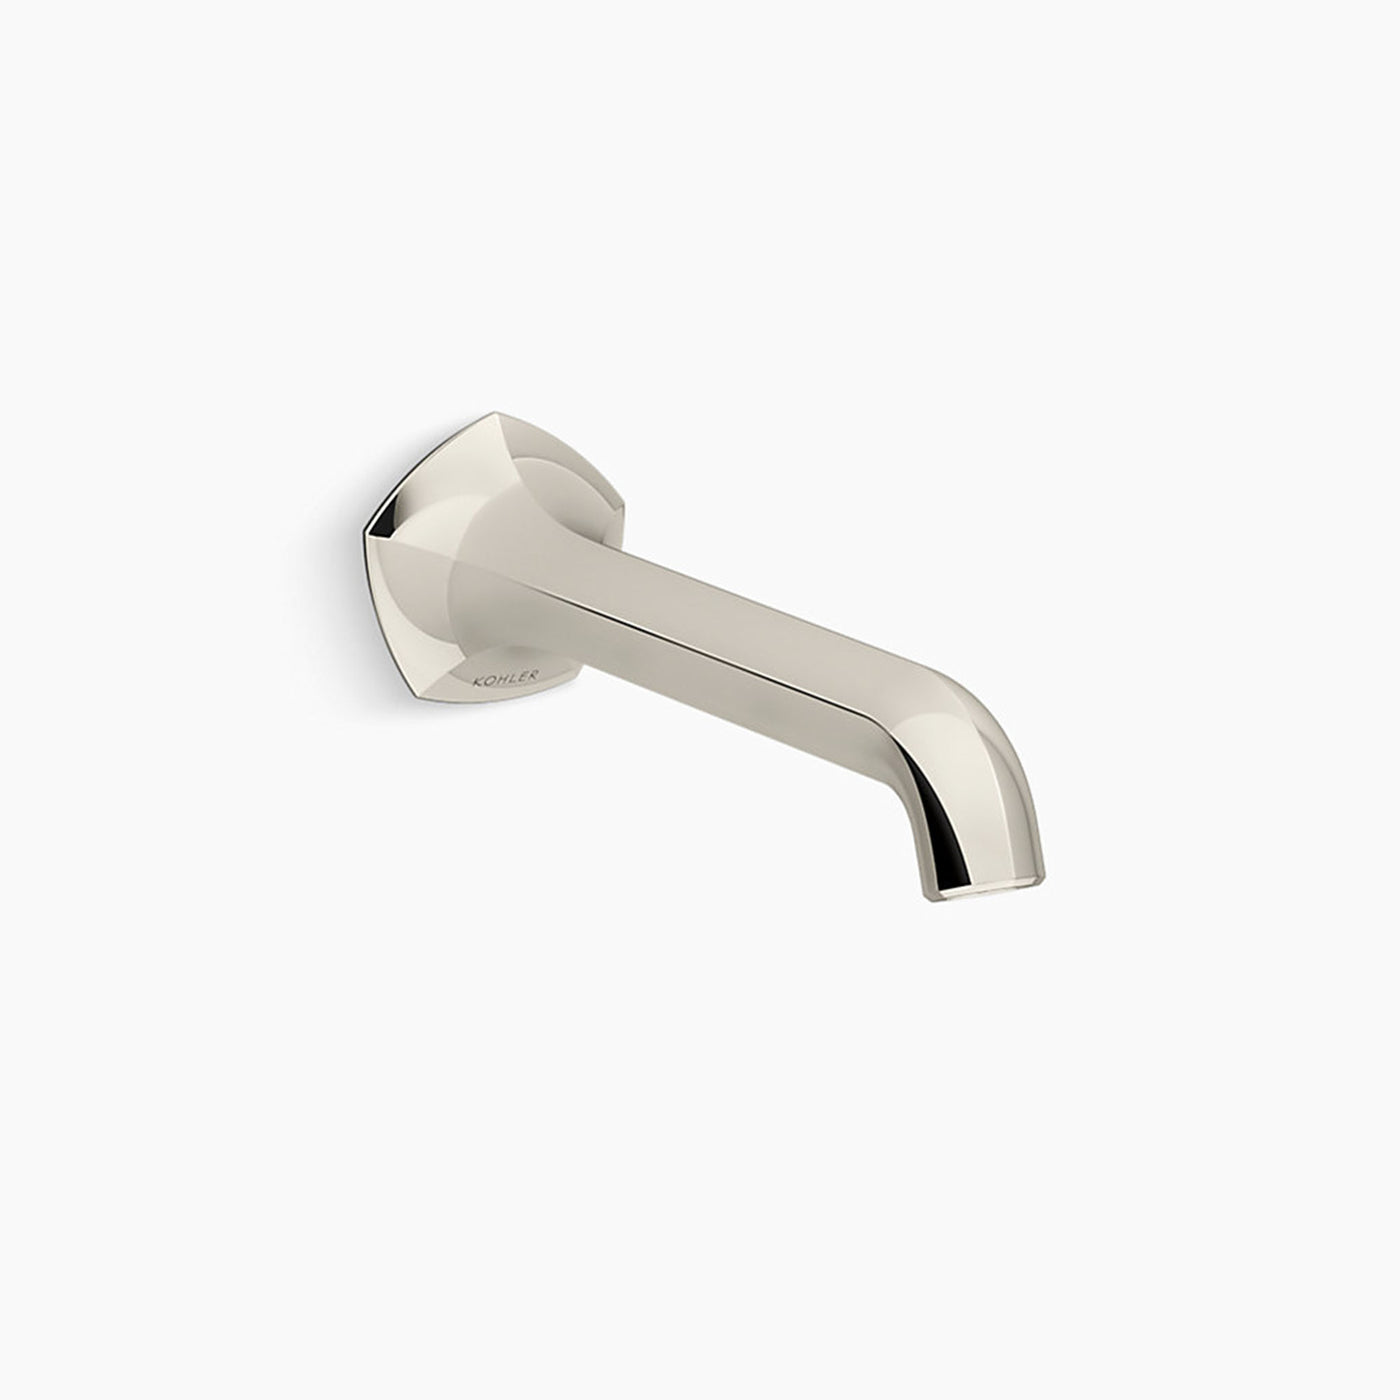 Occasion™ Wall-mount bathroom sink faucet spout with Straight design